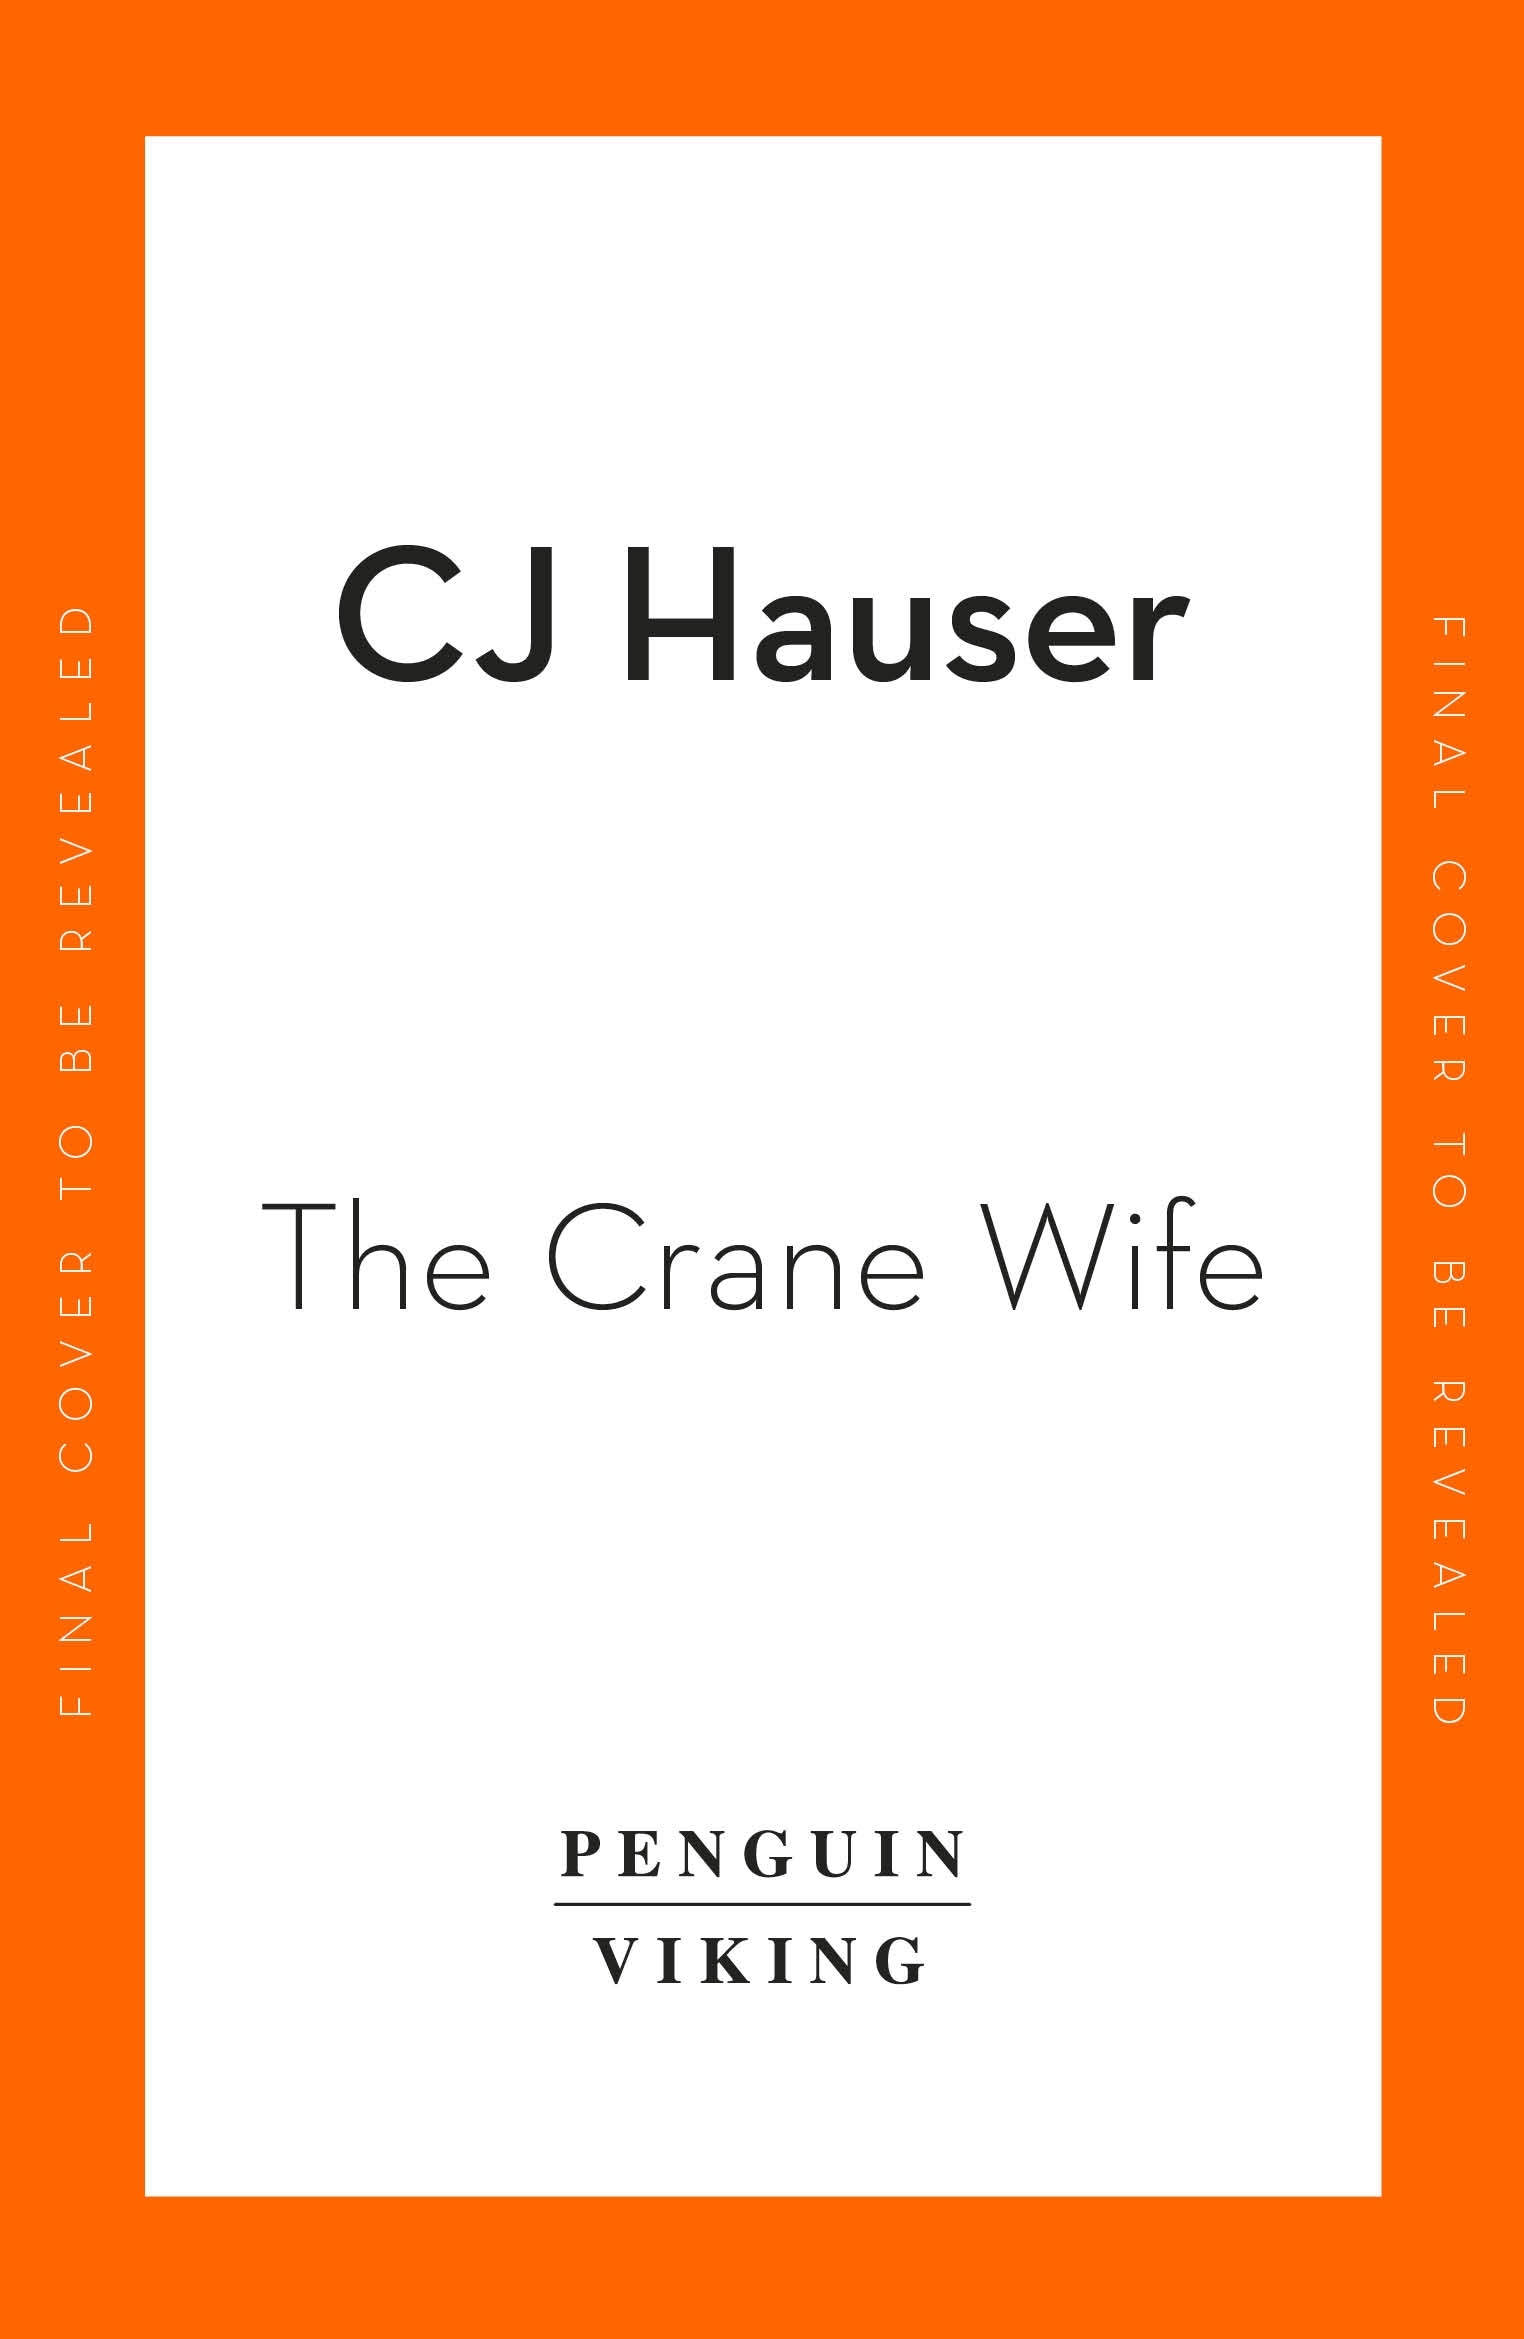 Book “The Crane Wife” by Christina Joyce Hauser — July 14, 2022